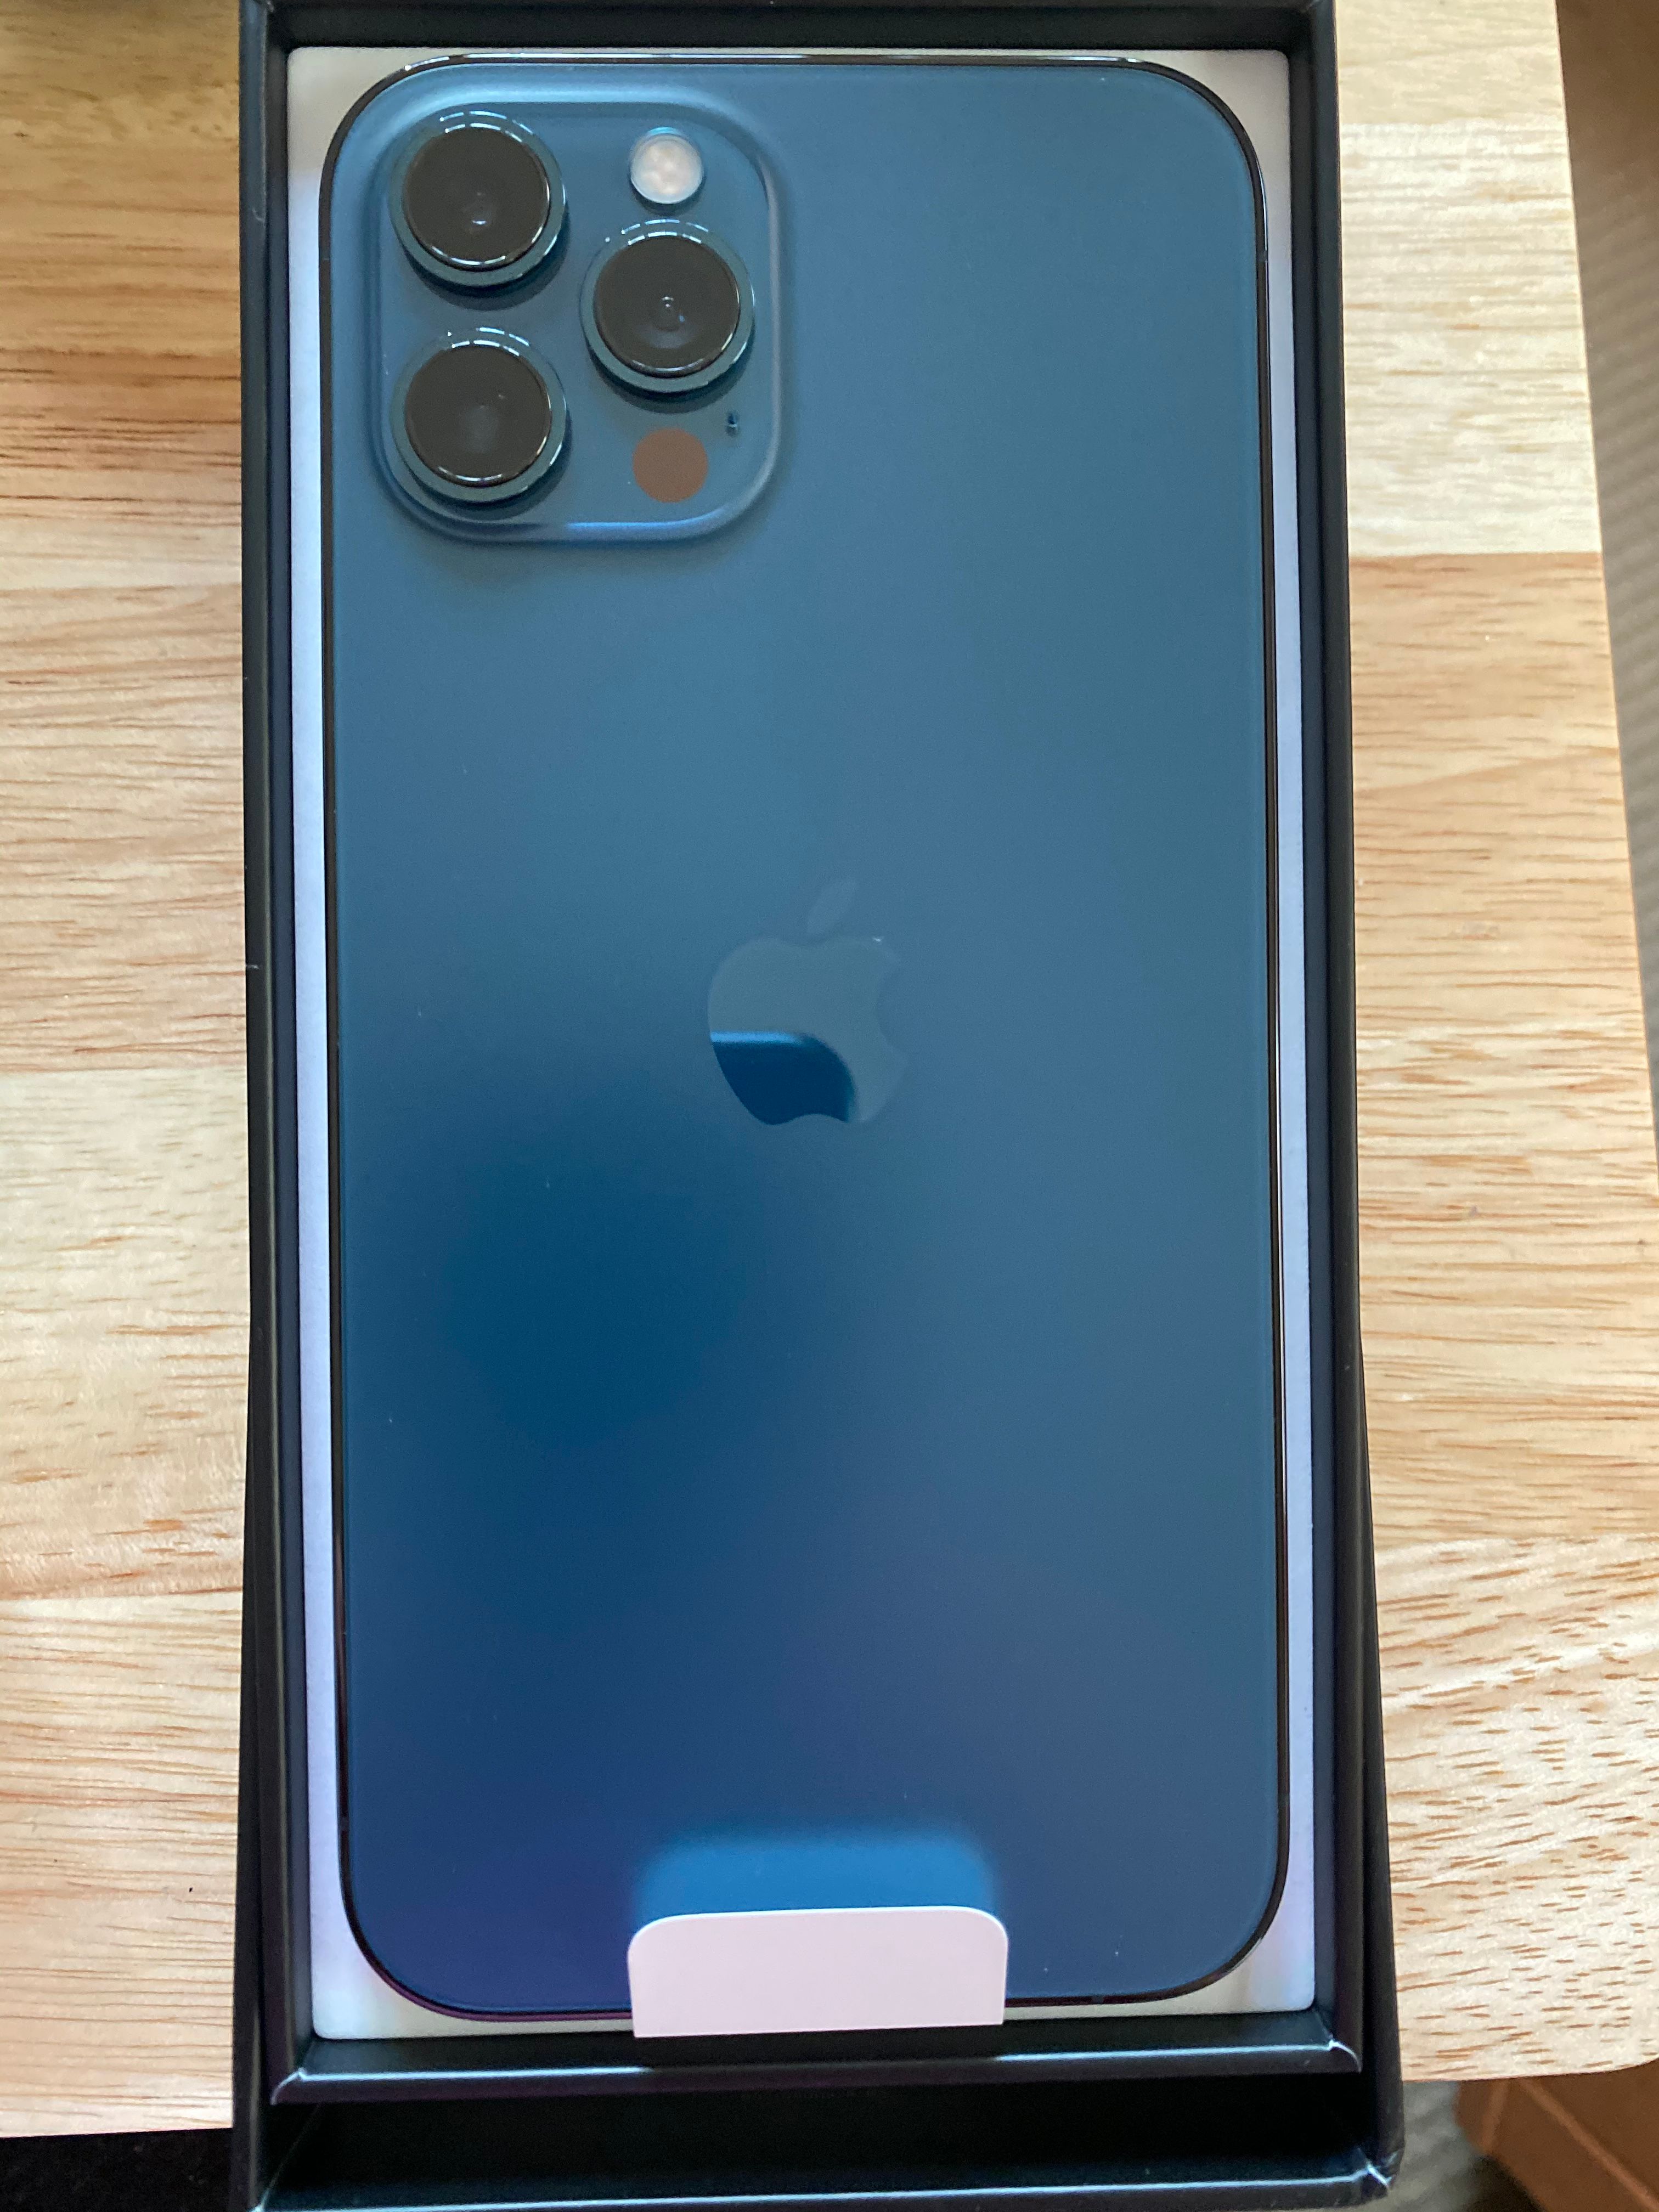 Solved: The iPhone 12 Pro Max 2020 Pre-Order Topic! - The EE Community